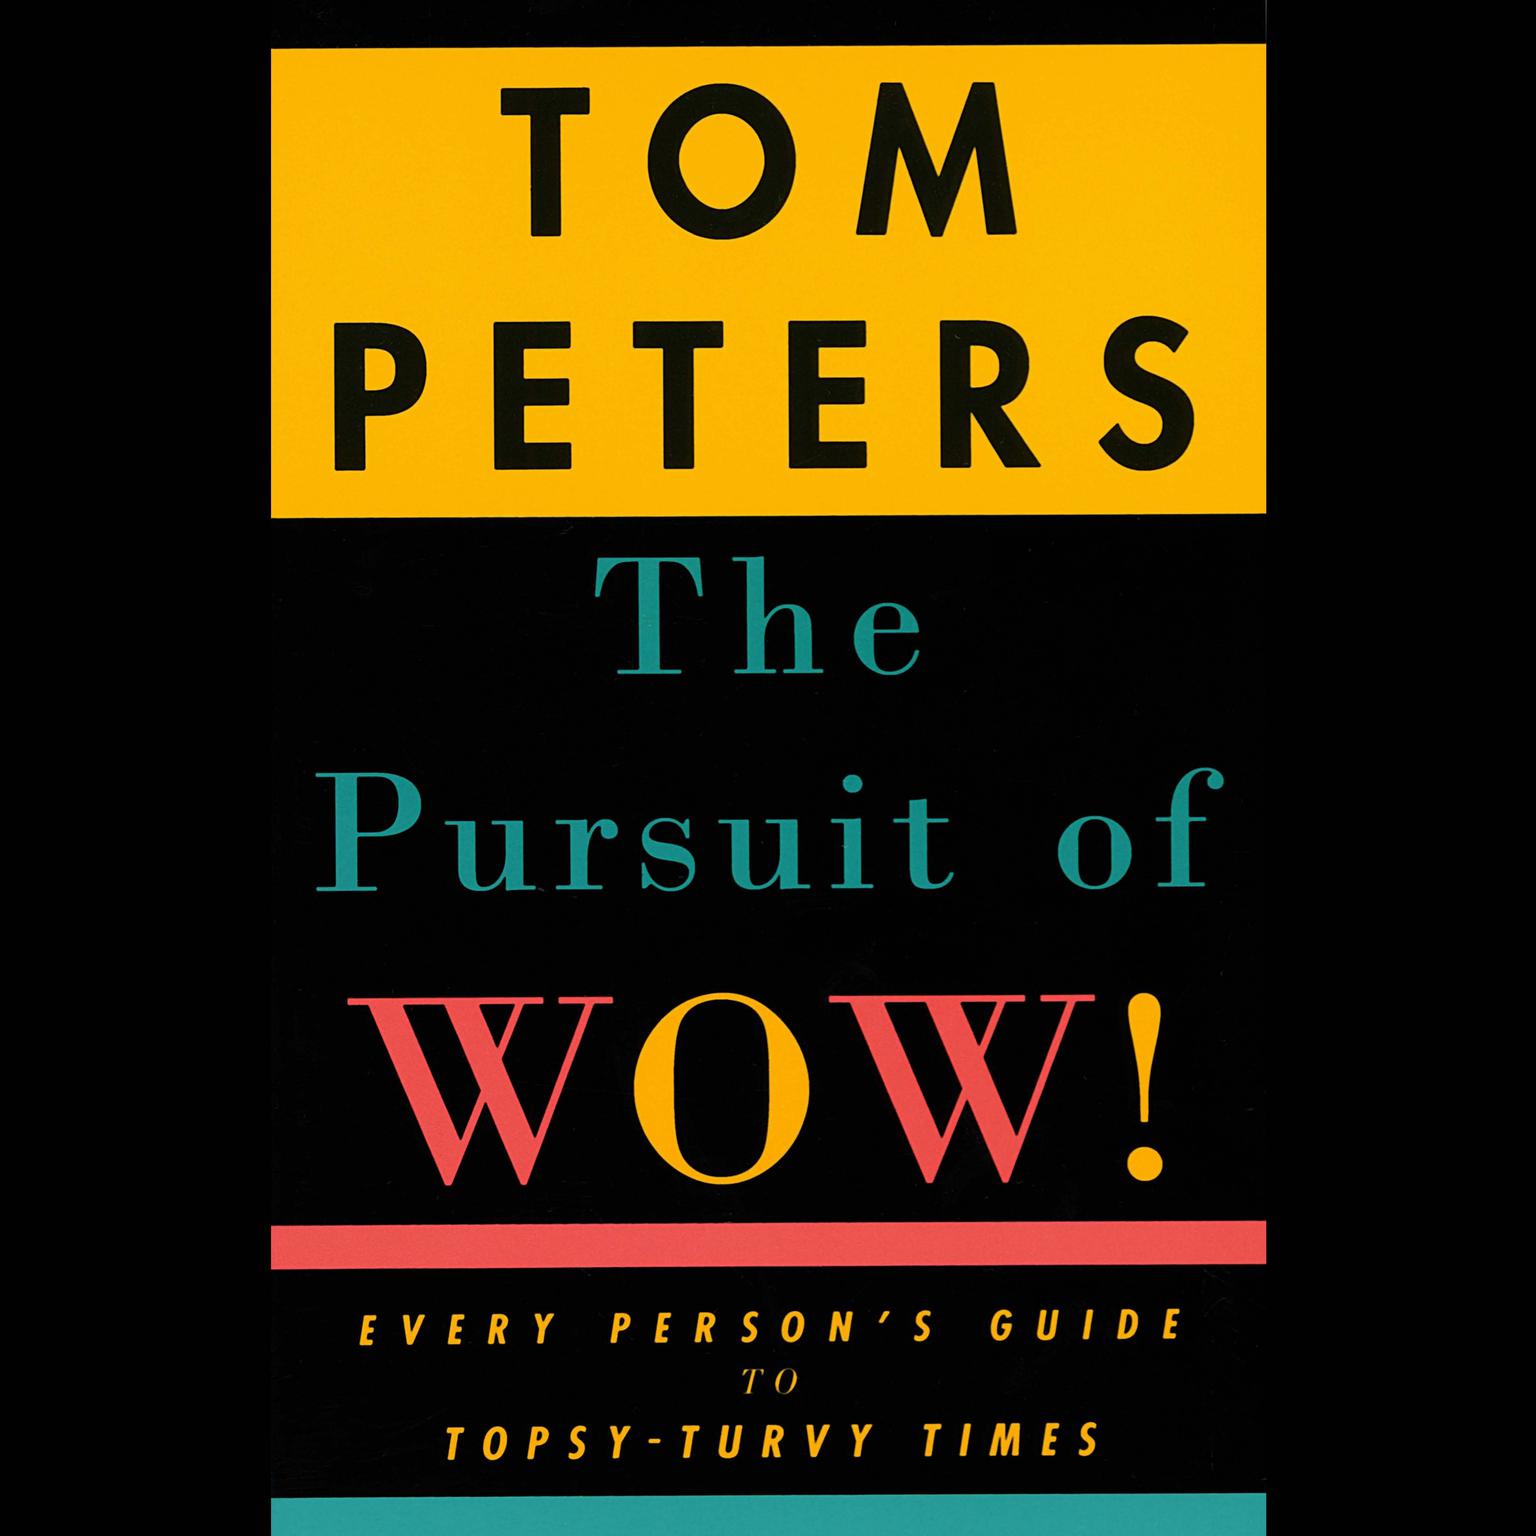 The Pursuit of Wow! (Abridged): Every Persons Guide to Topsy-turvy Times Audiobook, by Tom Peters